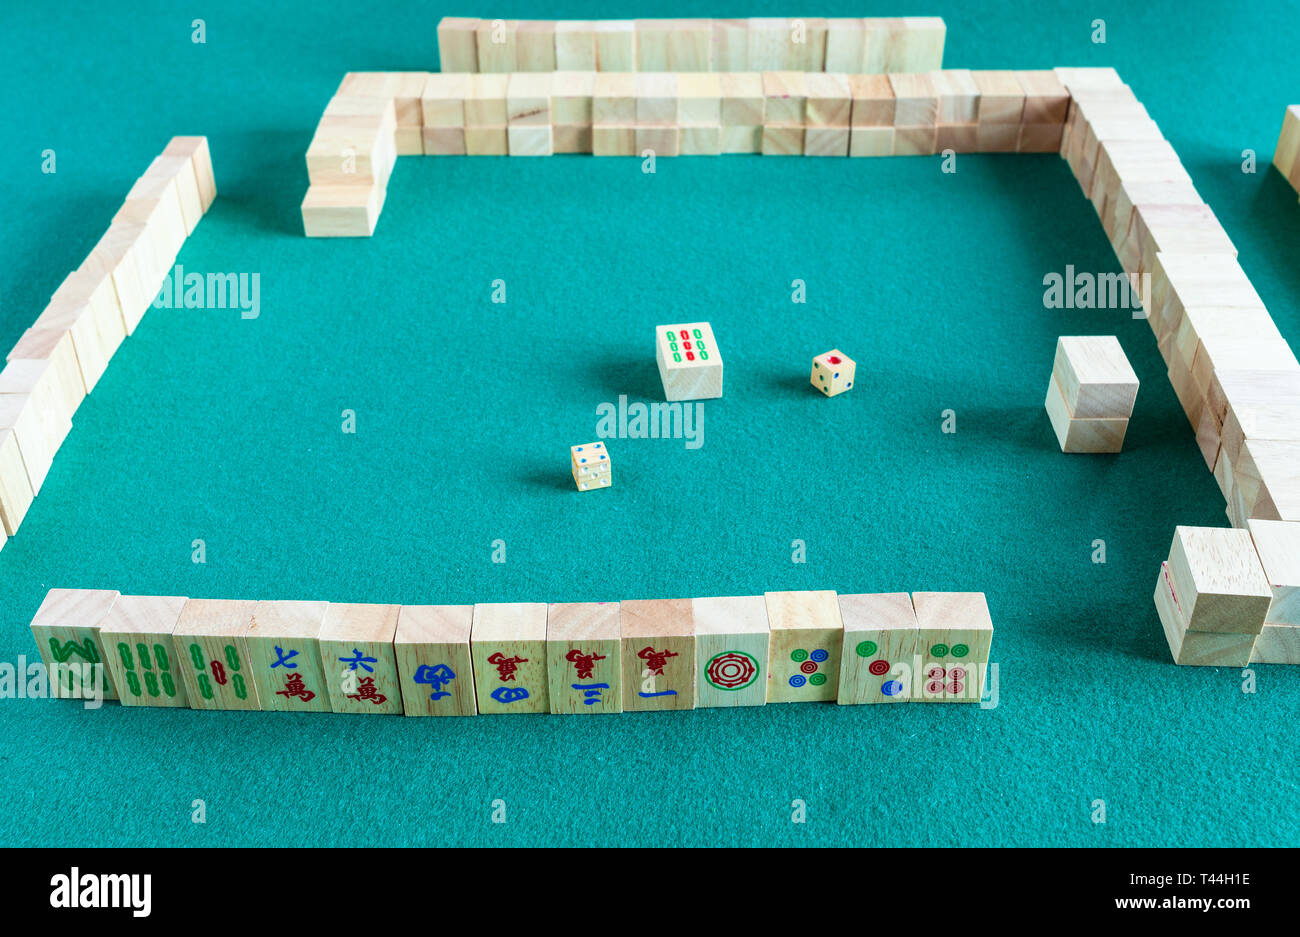 player's set at the beginning of mahjong game , tile-based chinese strategy board game on green baize table Stock Photo